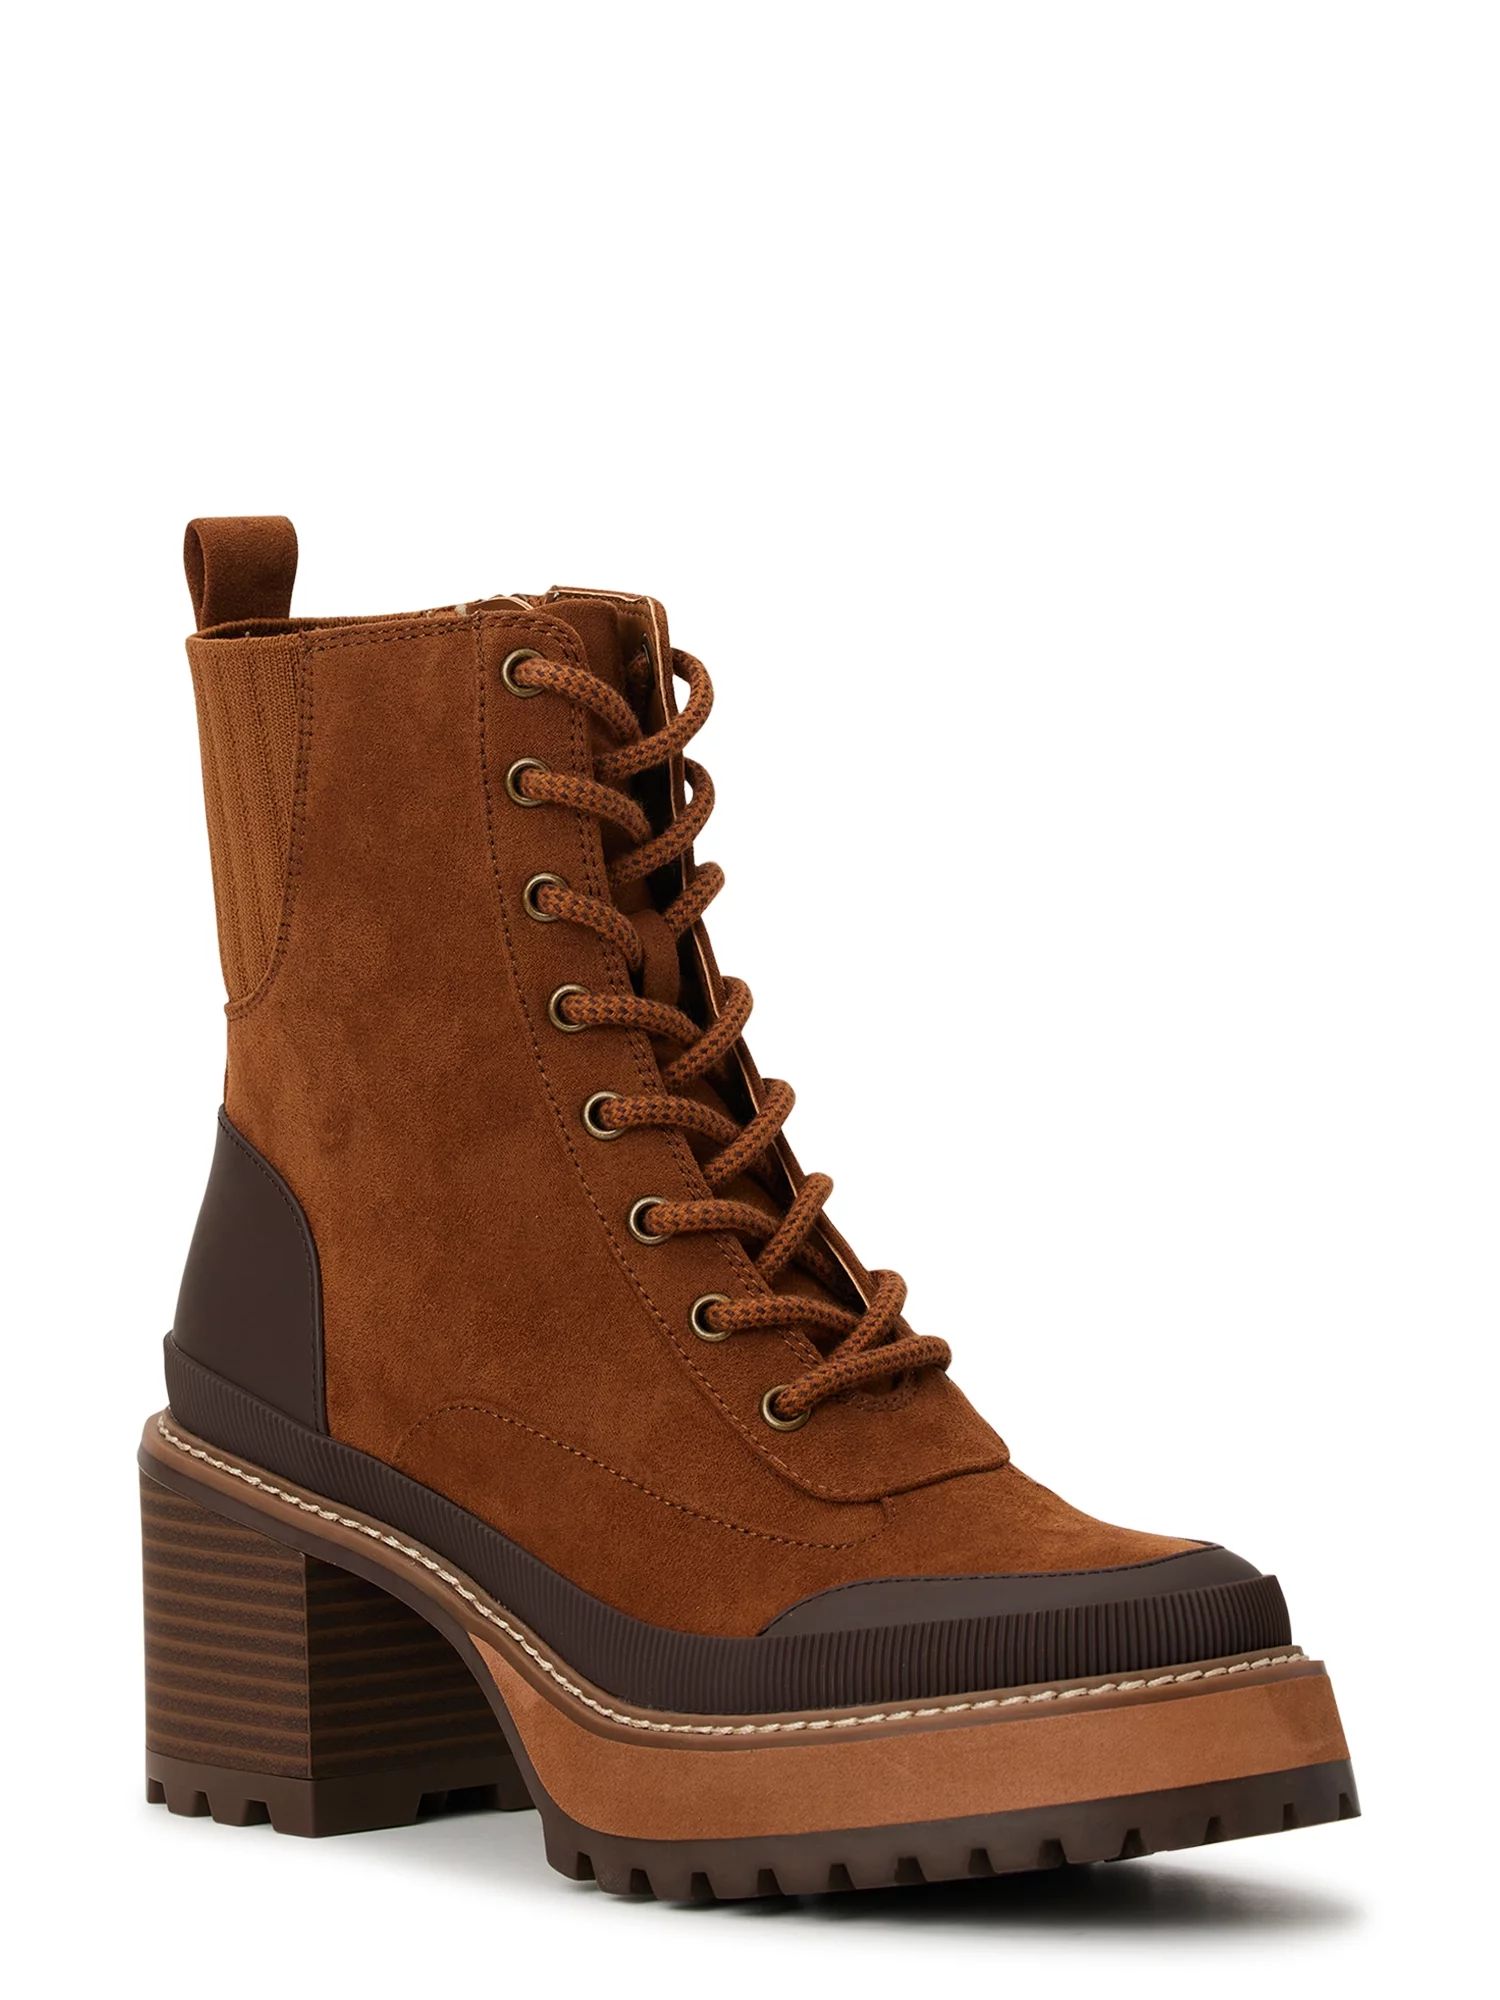 Madden NYC Women’s Platform Lace Up Booties with Lug Sole | Walmart (US)